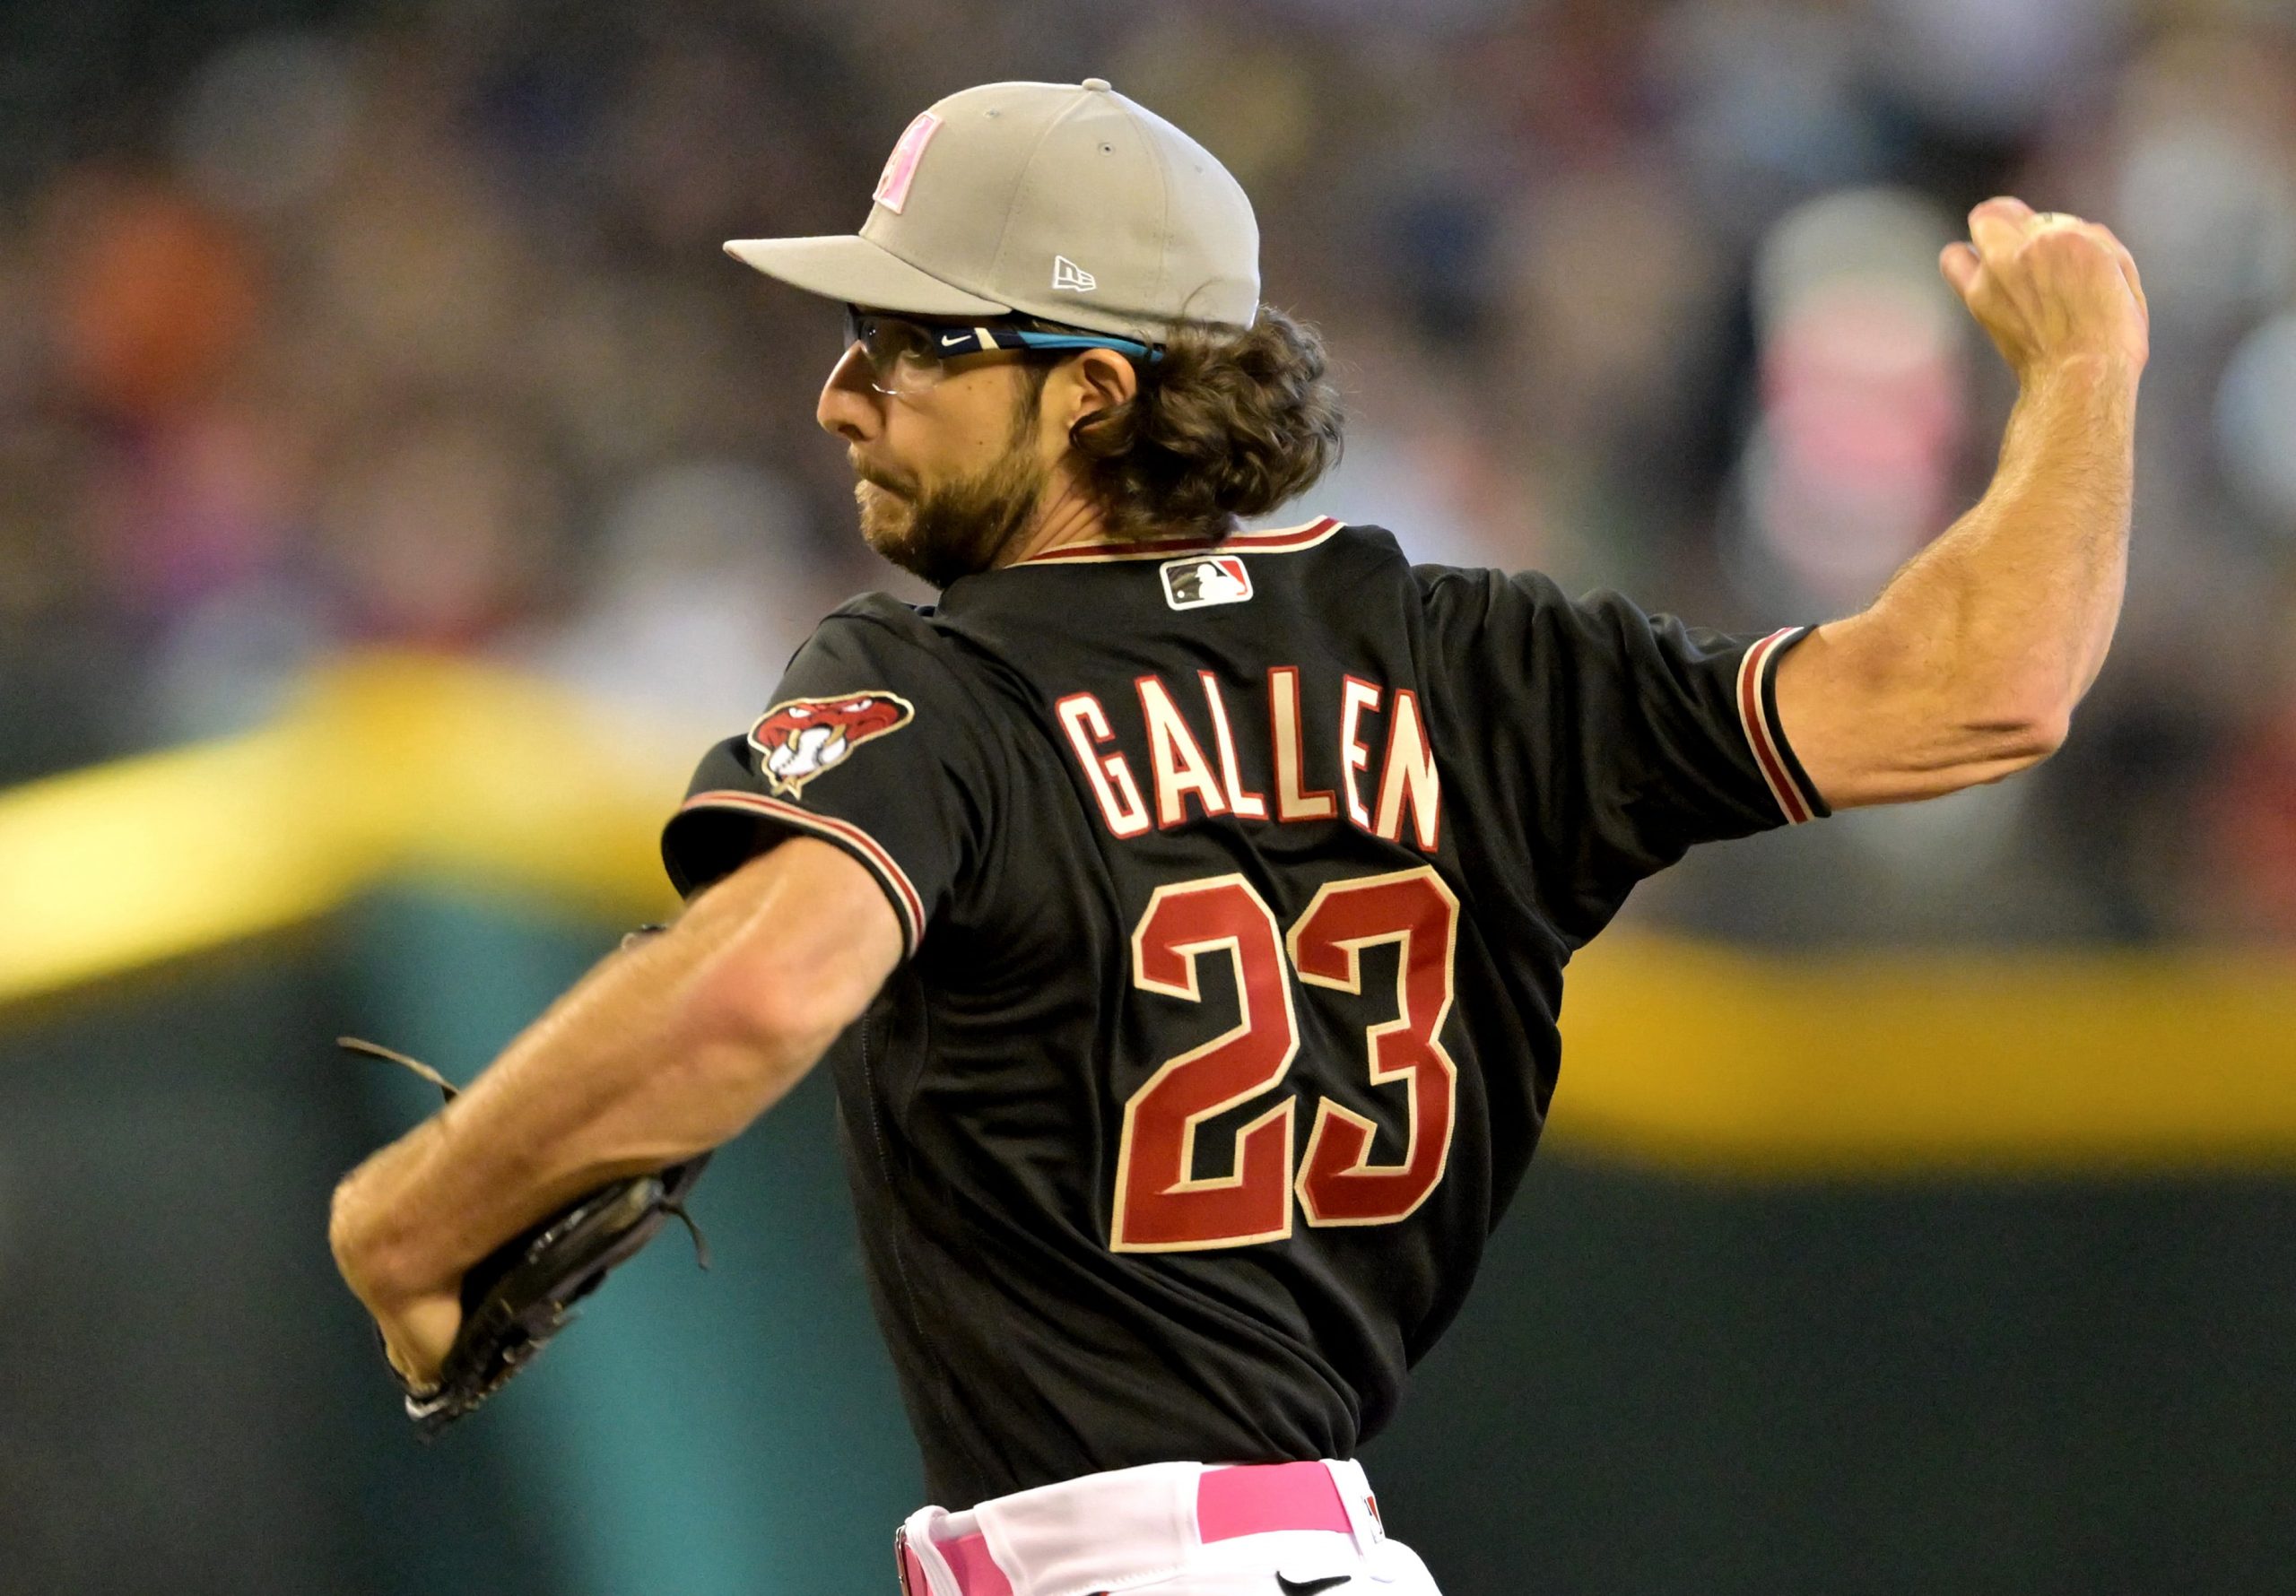 Best MLB player prop bet today 7/22: Gallen makes quick work of the Nats